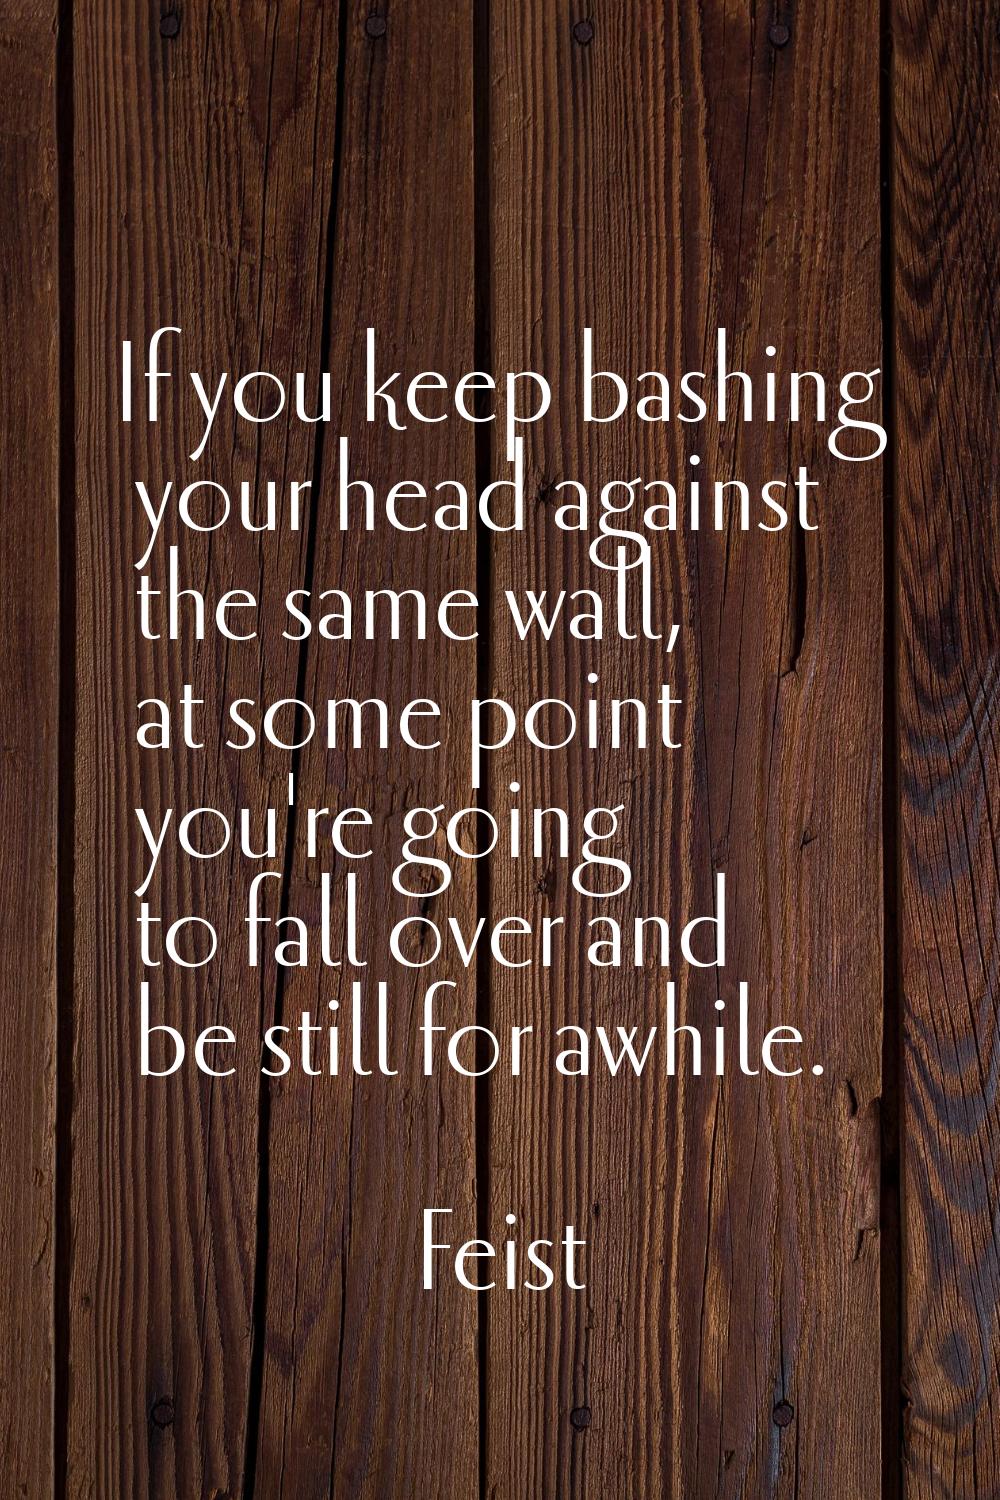 If you keep bashing your head against the same wall, at some point you're going to fall over and be